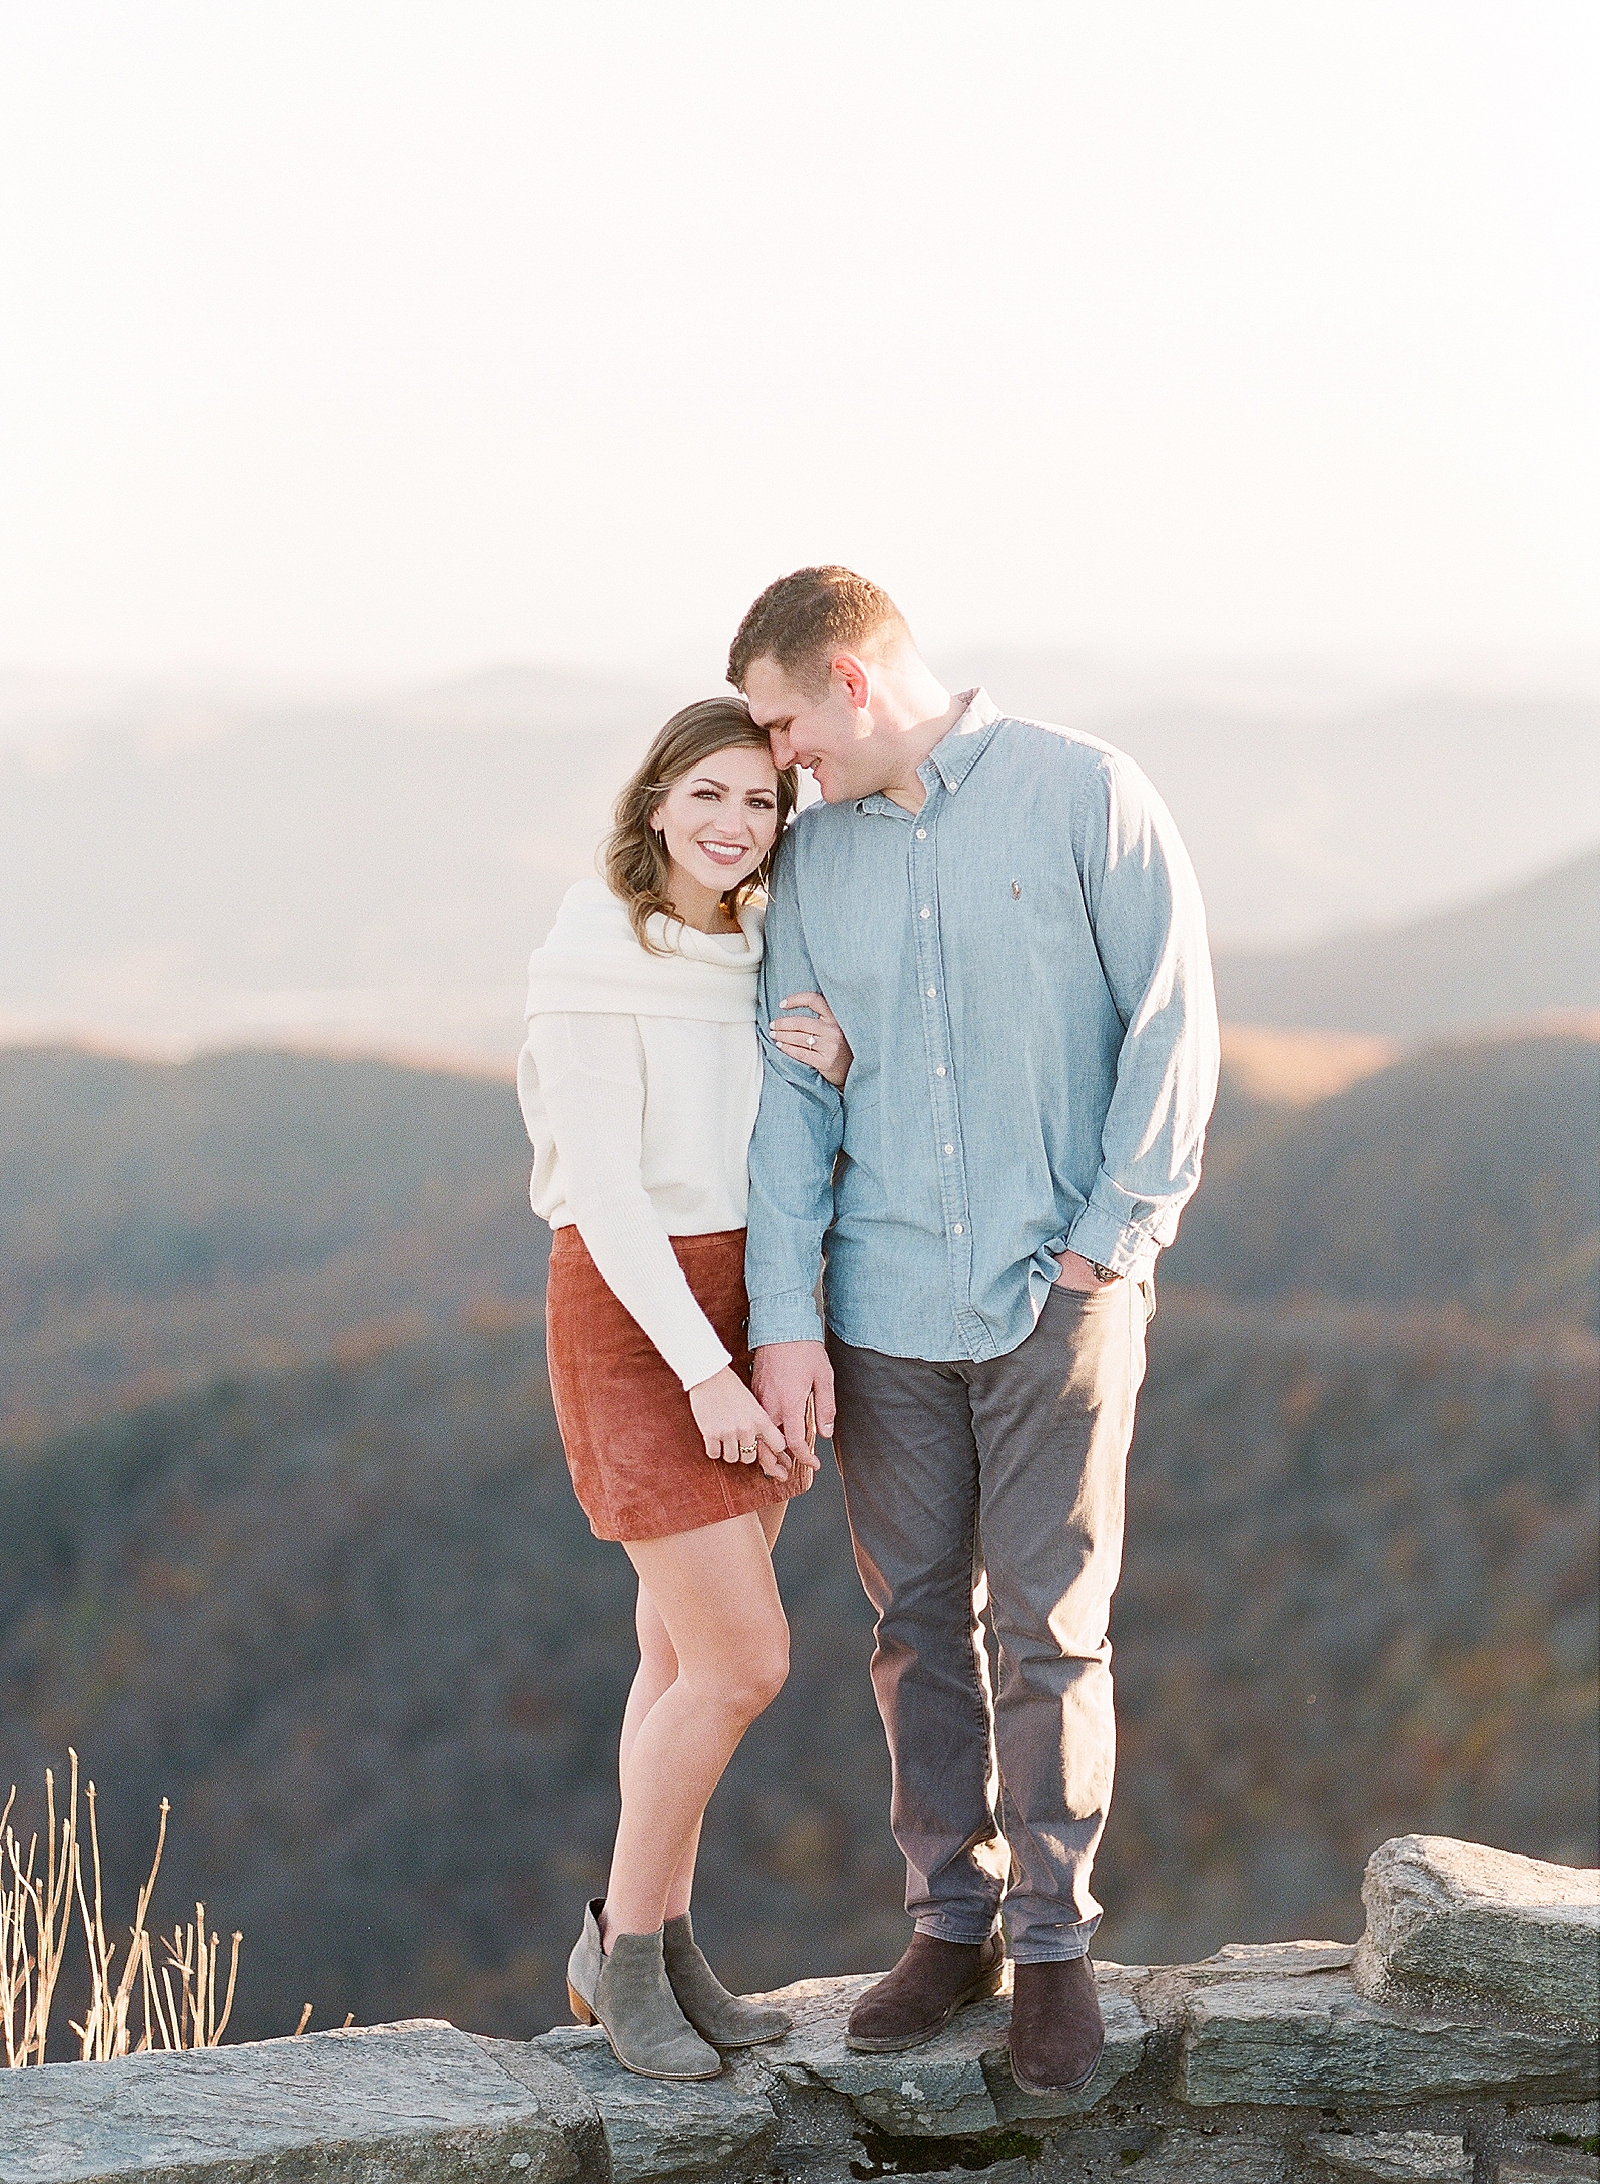 How To Have The Best Craggy Gardens Engagement Photos Couple Snuggling With Mountains In The Background Photo